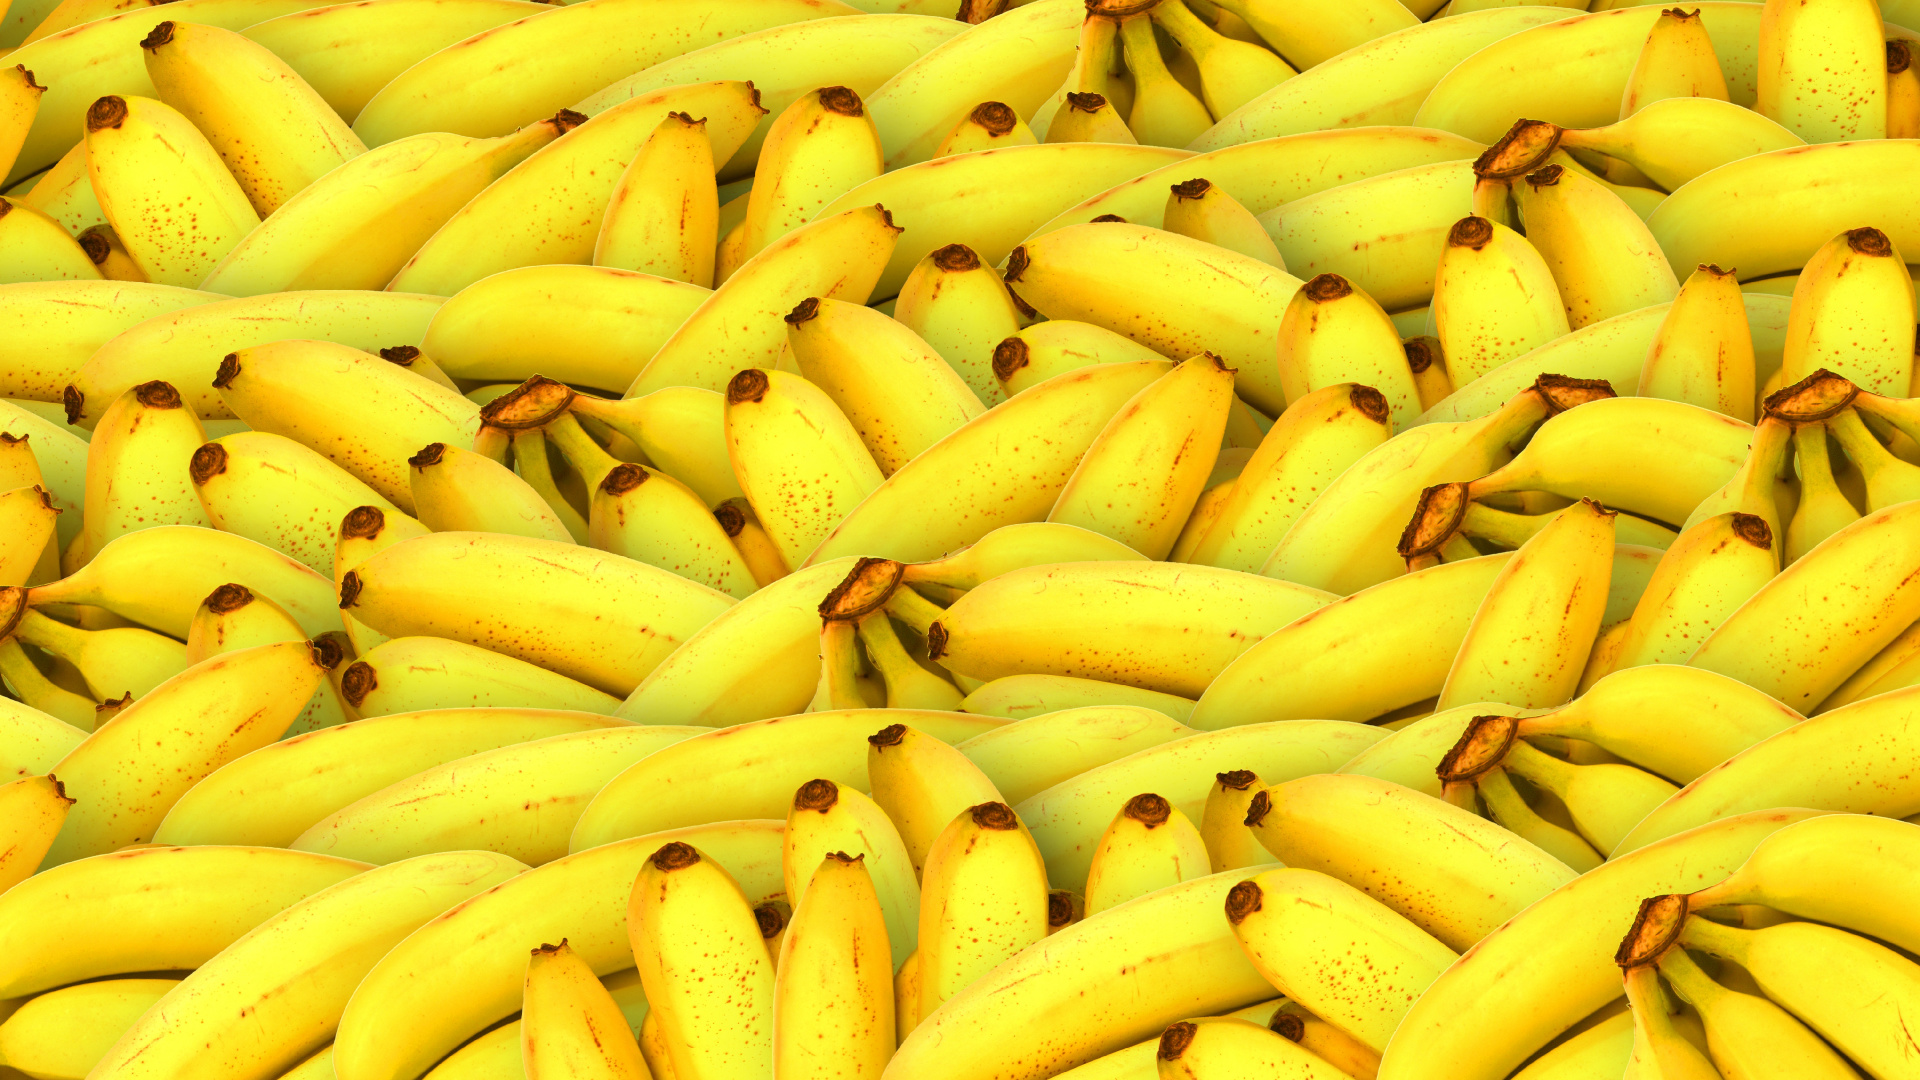 Yellow Banana Fruit on Brown Wooden Table. Wallpaper in 1920x1080 Resolution